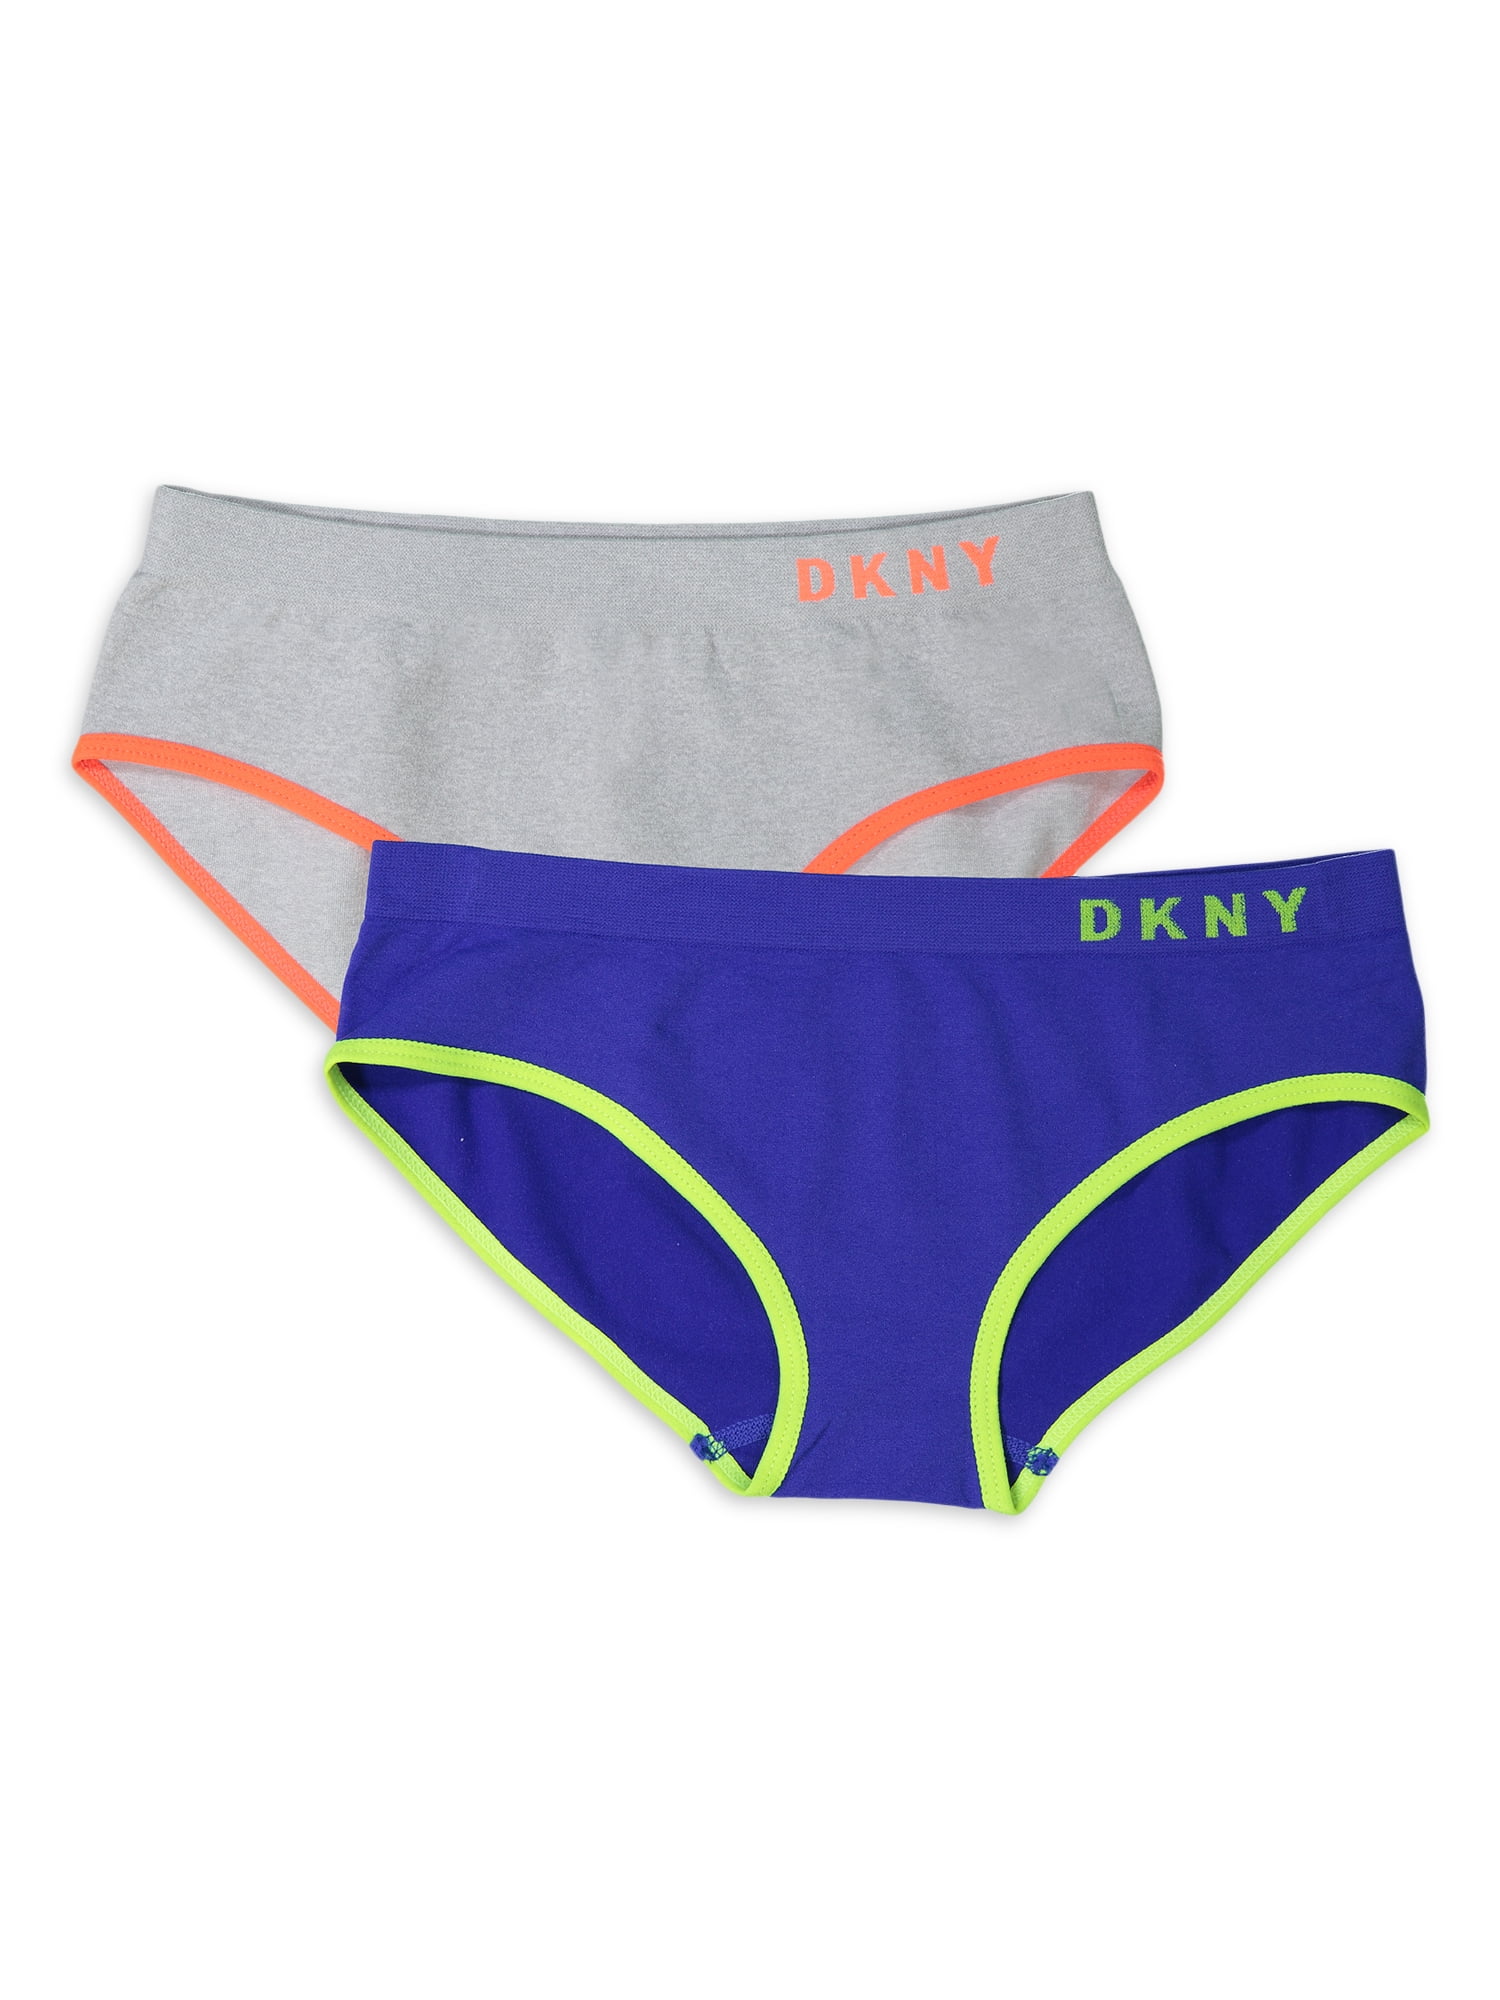 DKNY Girls Underwear, 2 Pack Hipster Seamless Panties, Sizes S-XL